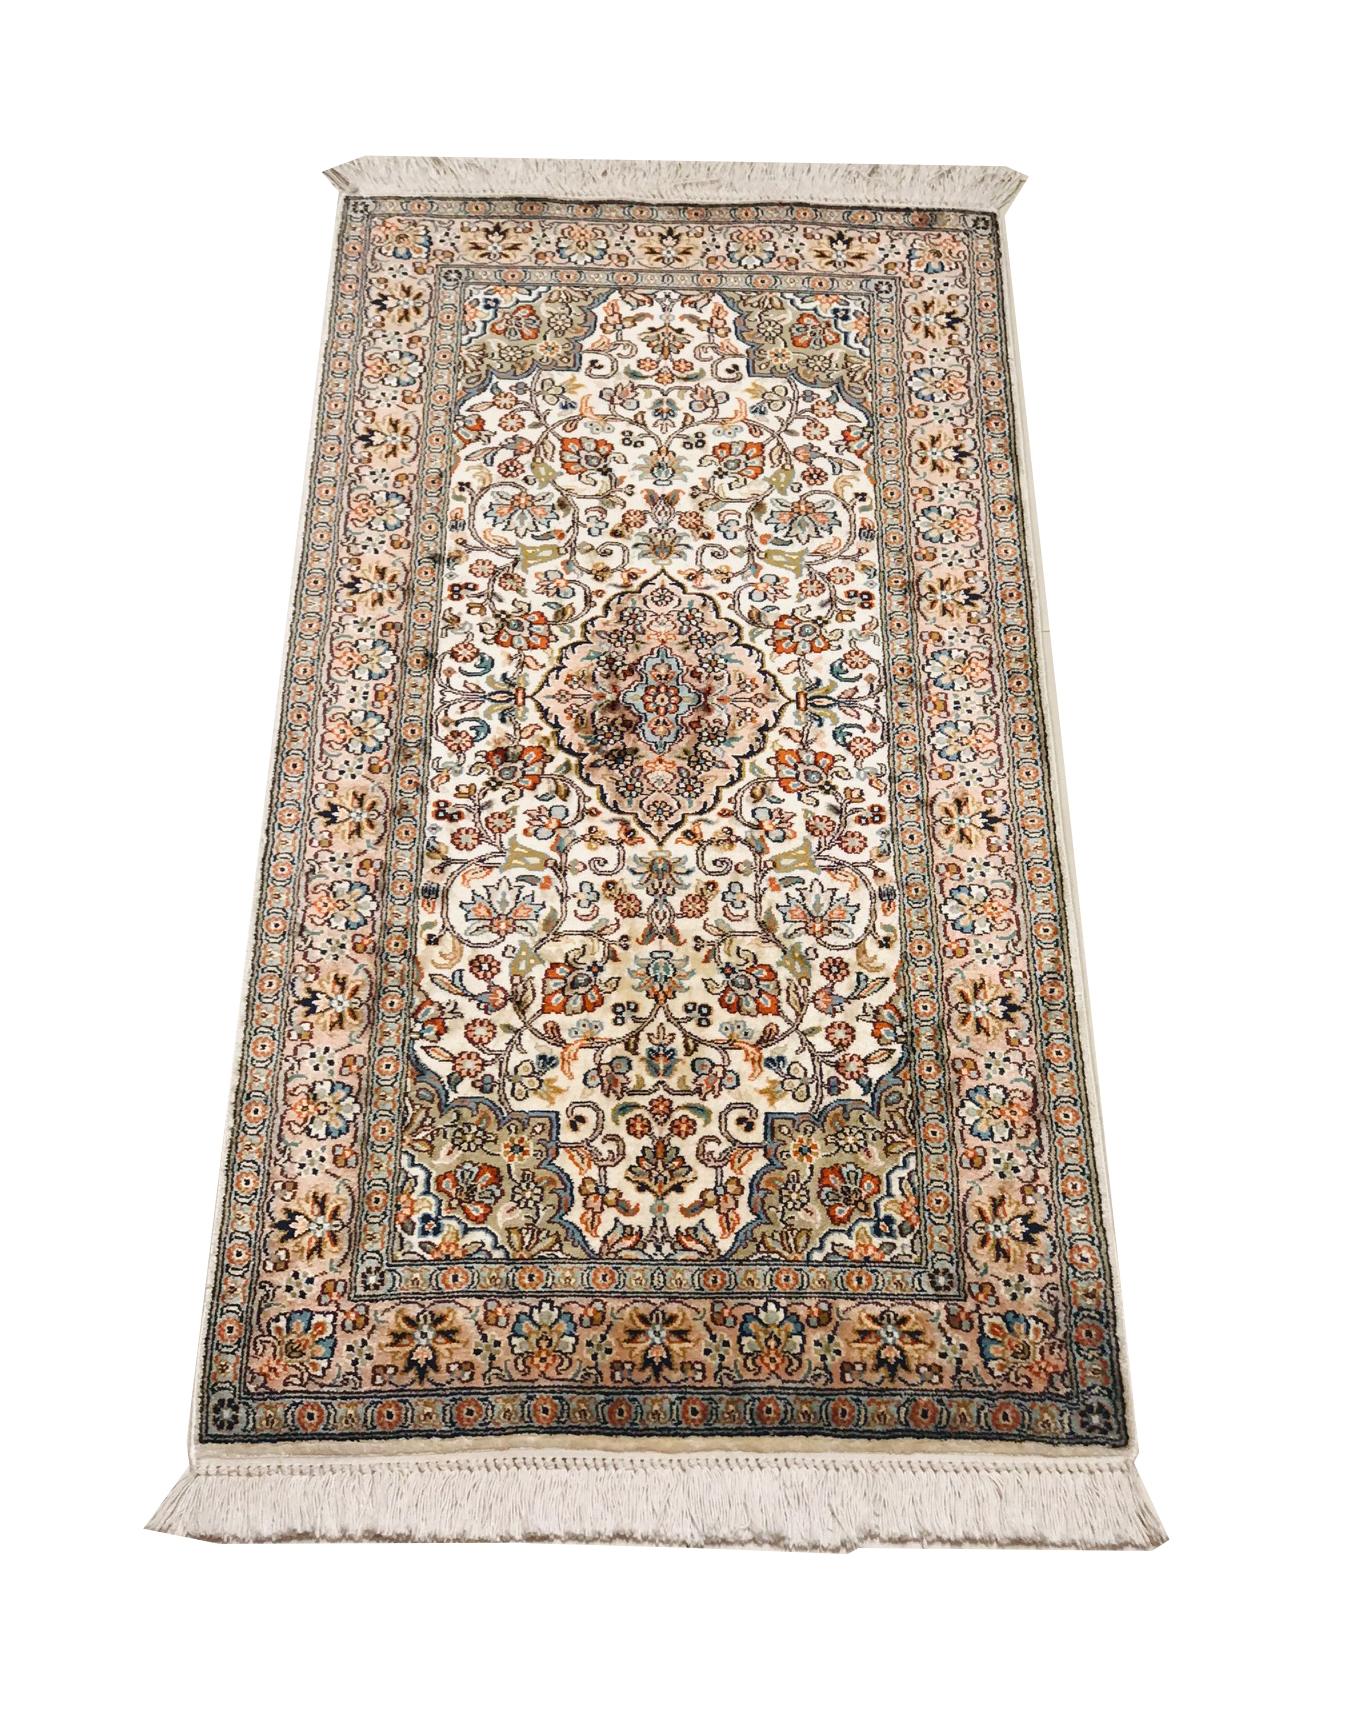 The rugs are from the 1970s, hand knotted with silk.
This set of carpet has geometric drawings, gives off a combination of soft colors such as red and beige that makes it a perfect piece to decorate a corner of our home.